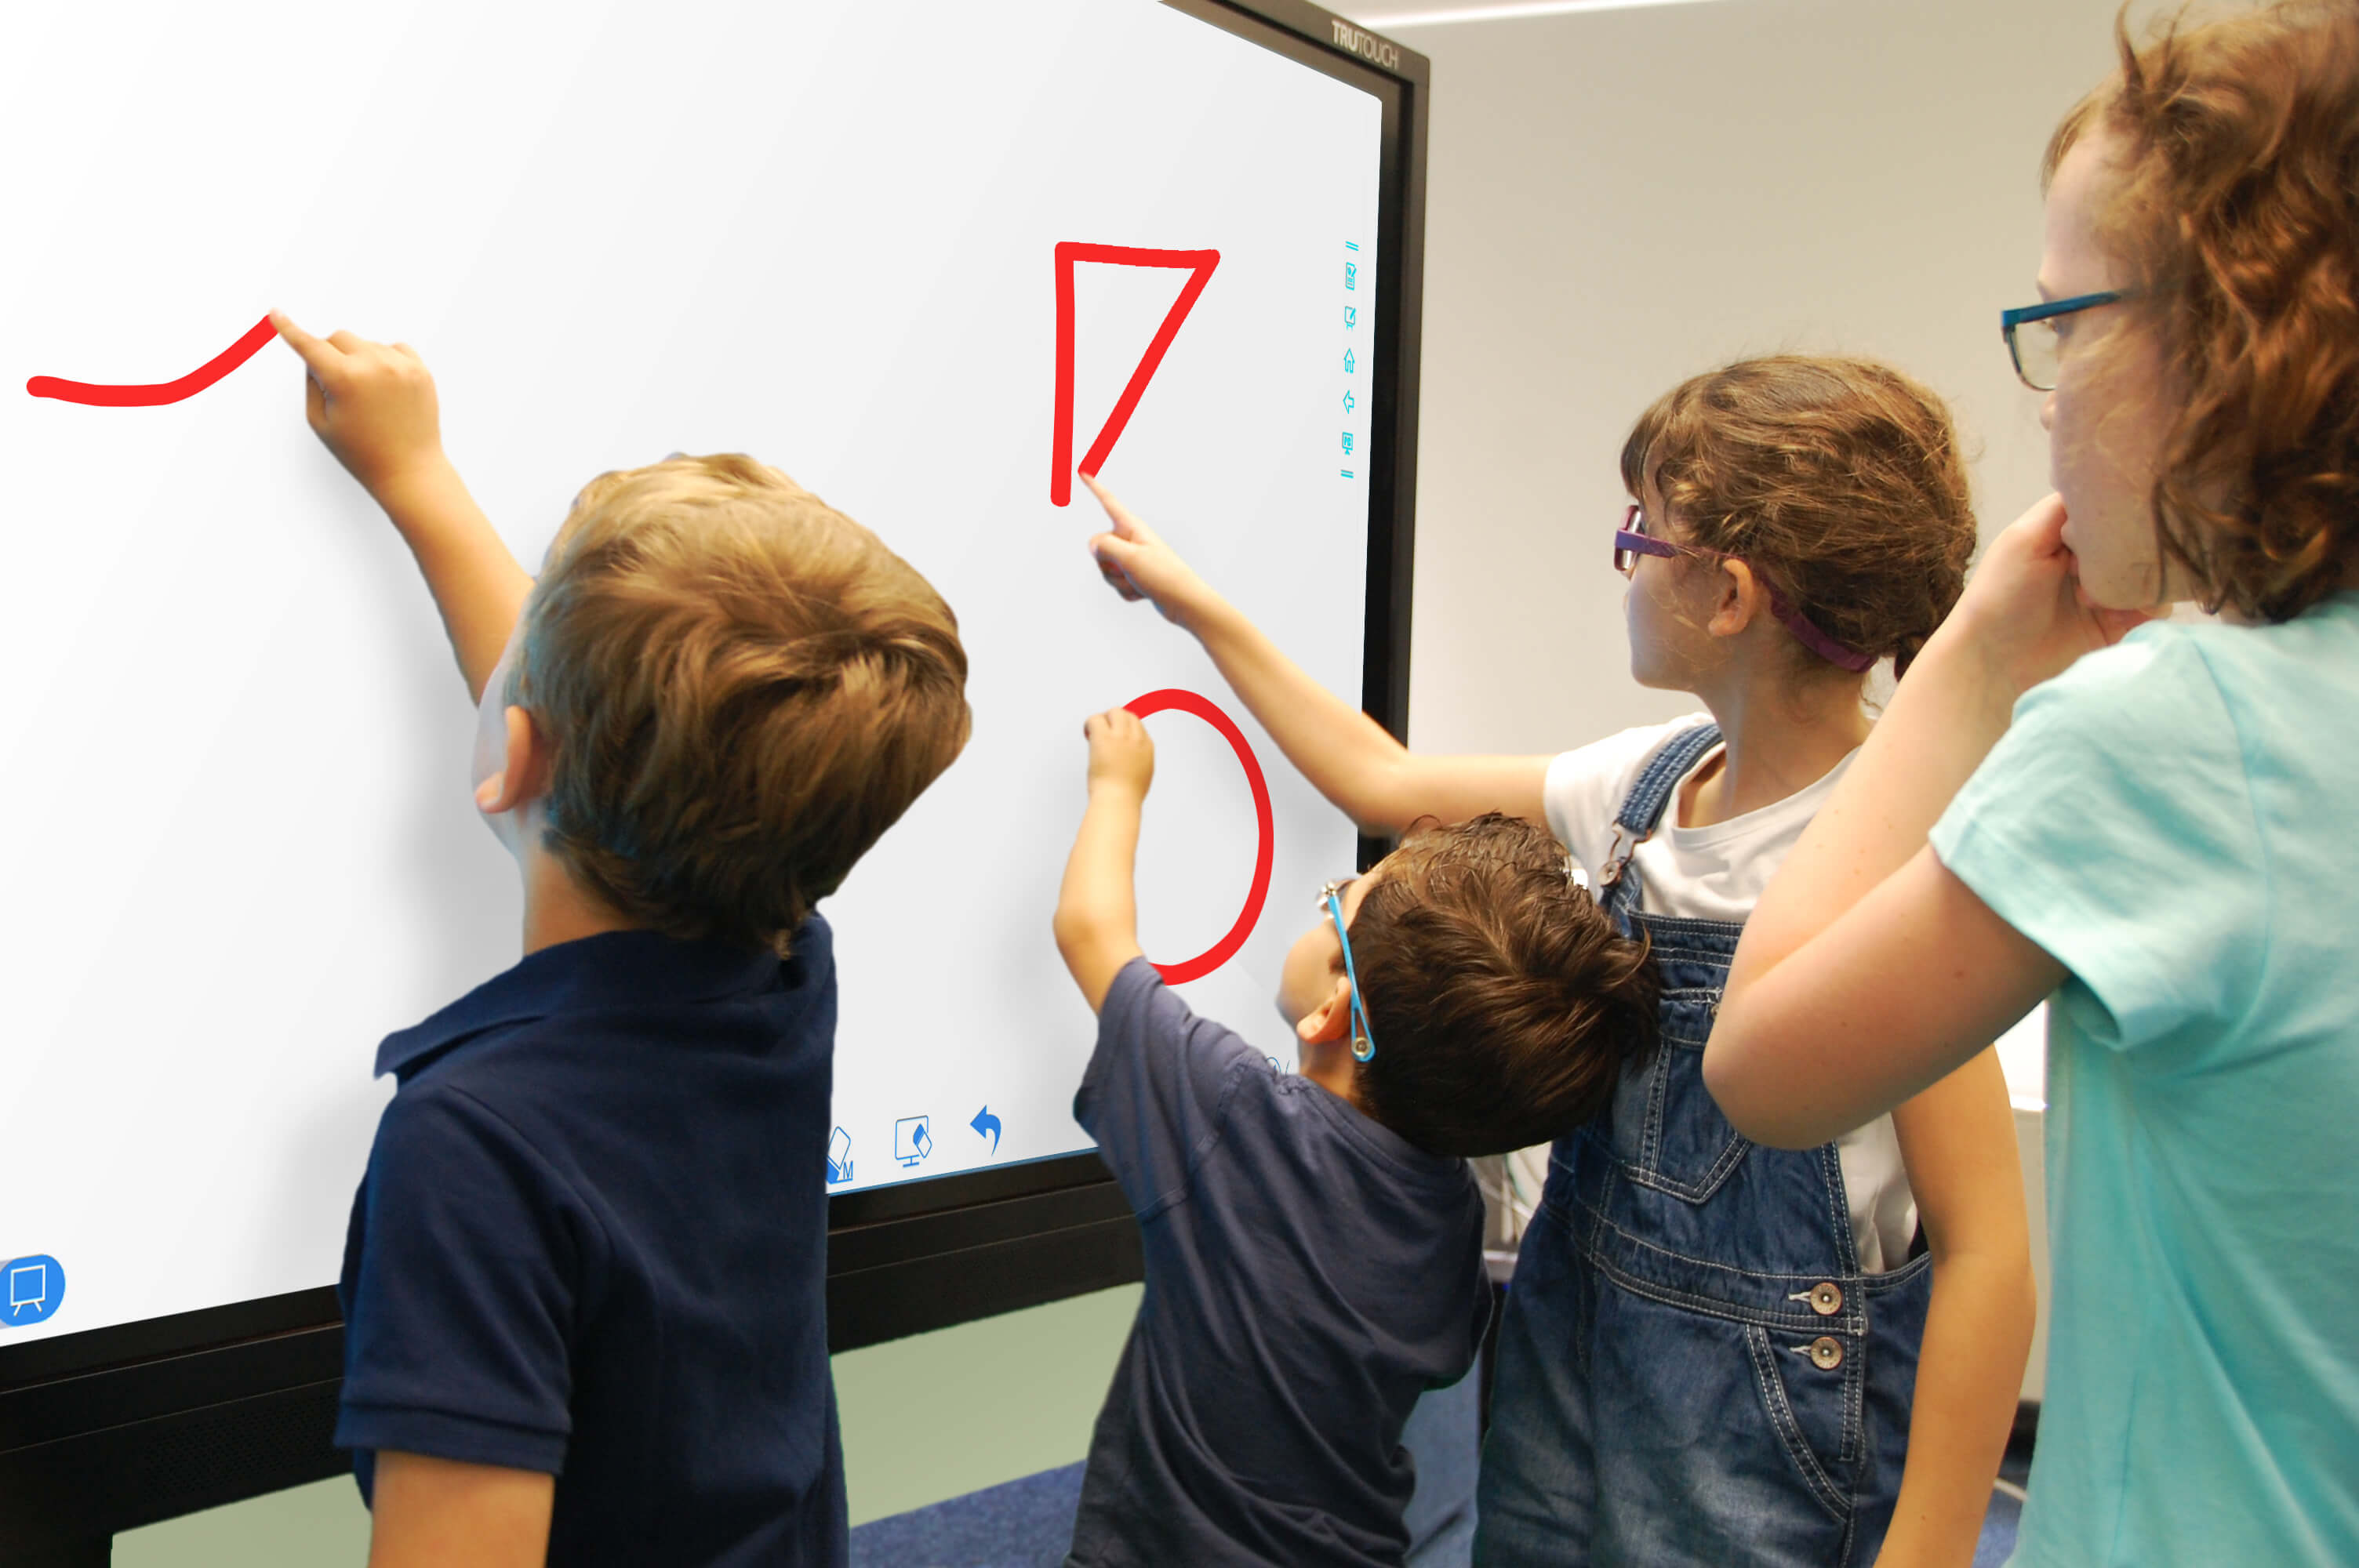 75" Interactive Display, 20 Point Multi-Touch, 4K